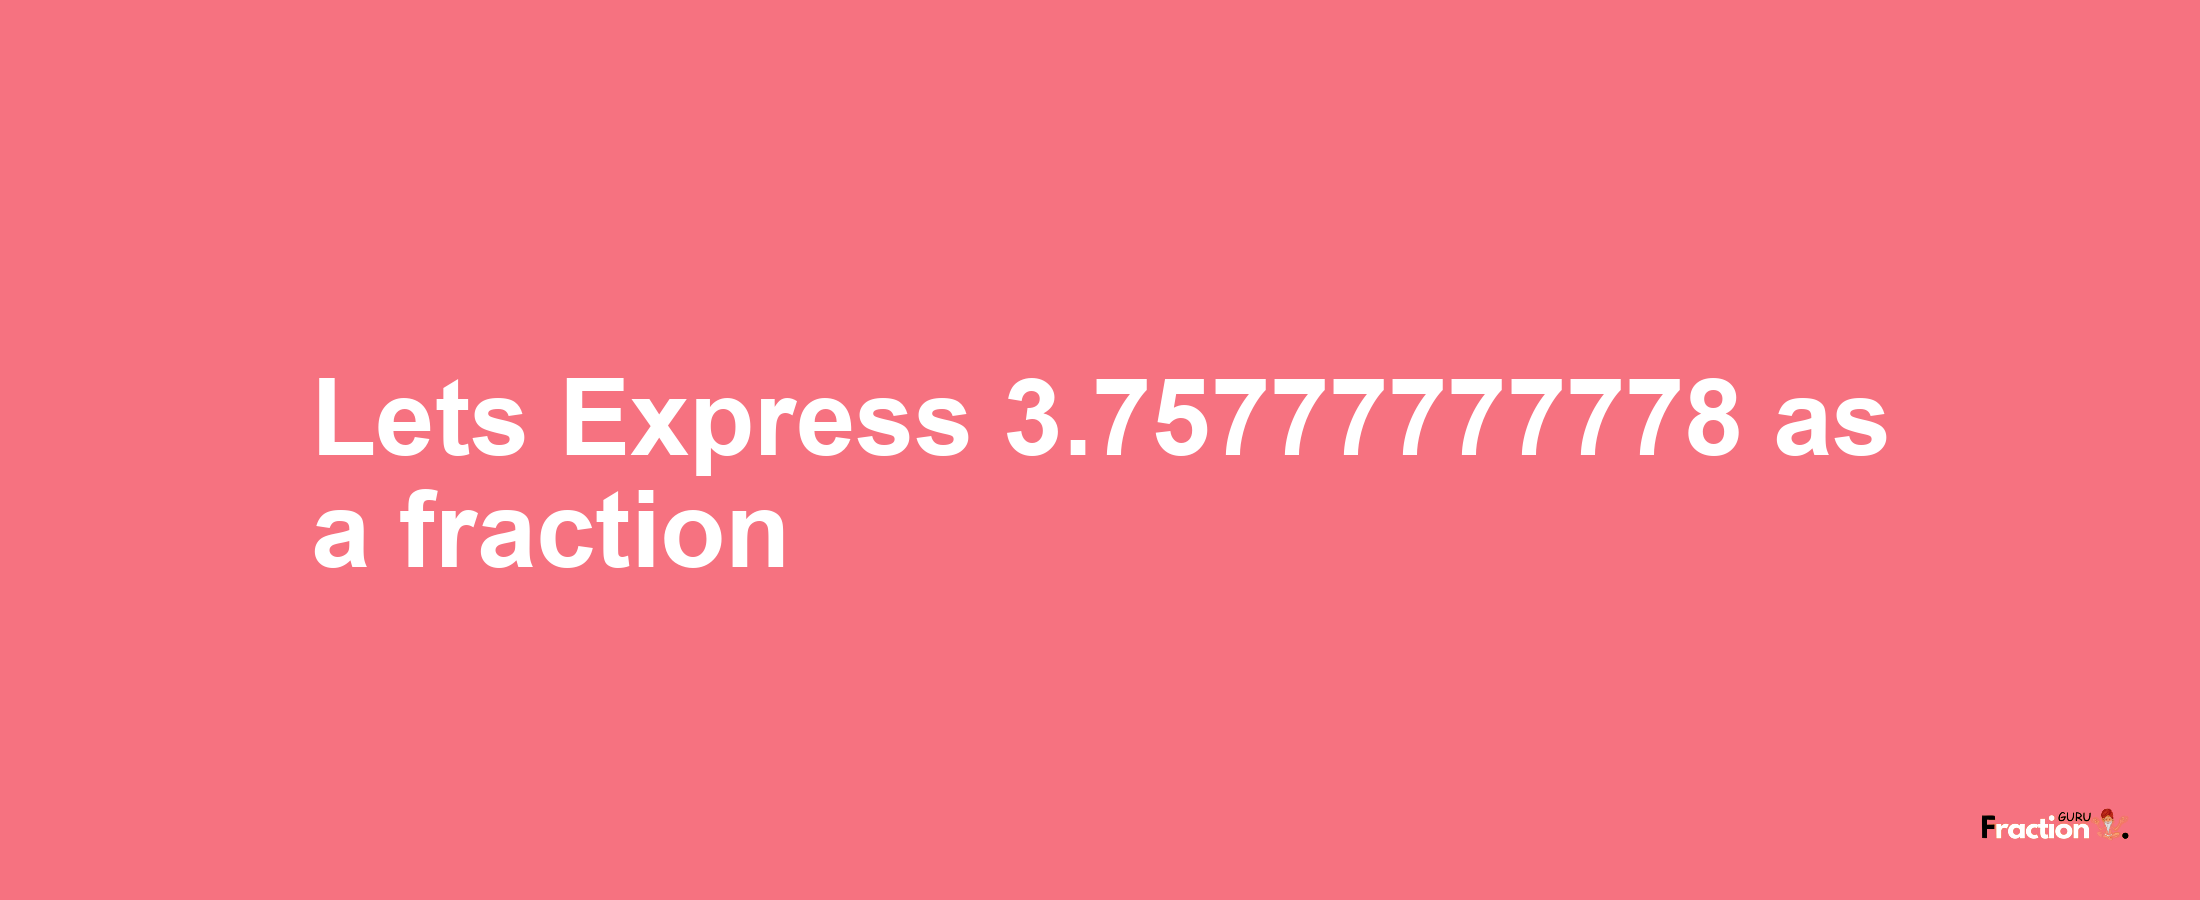 Lets Express 3.75777777778 as afraction